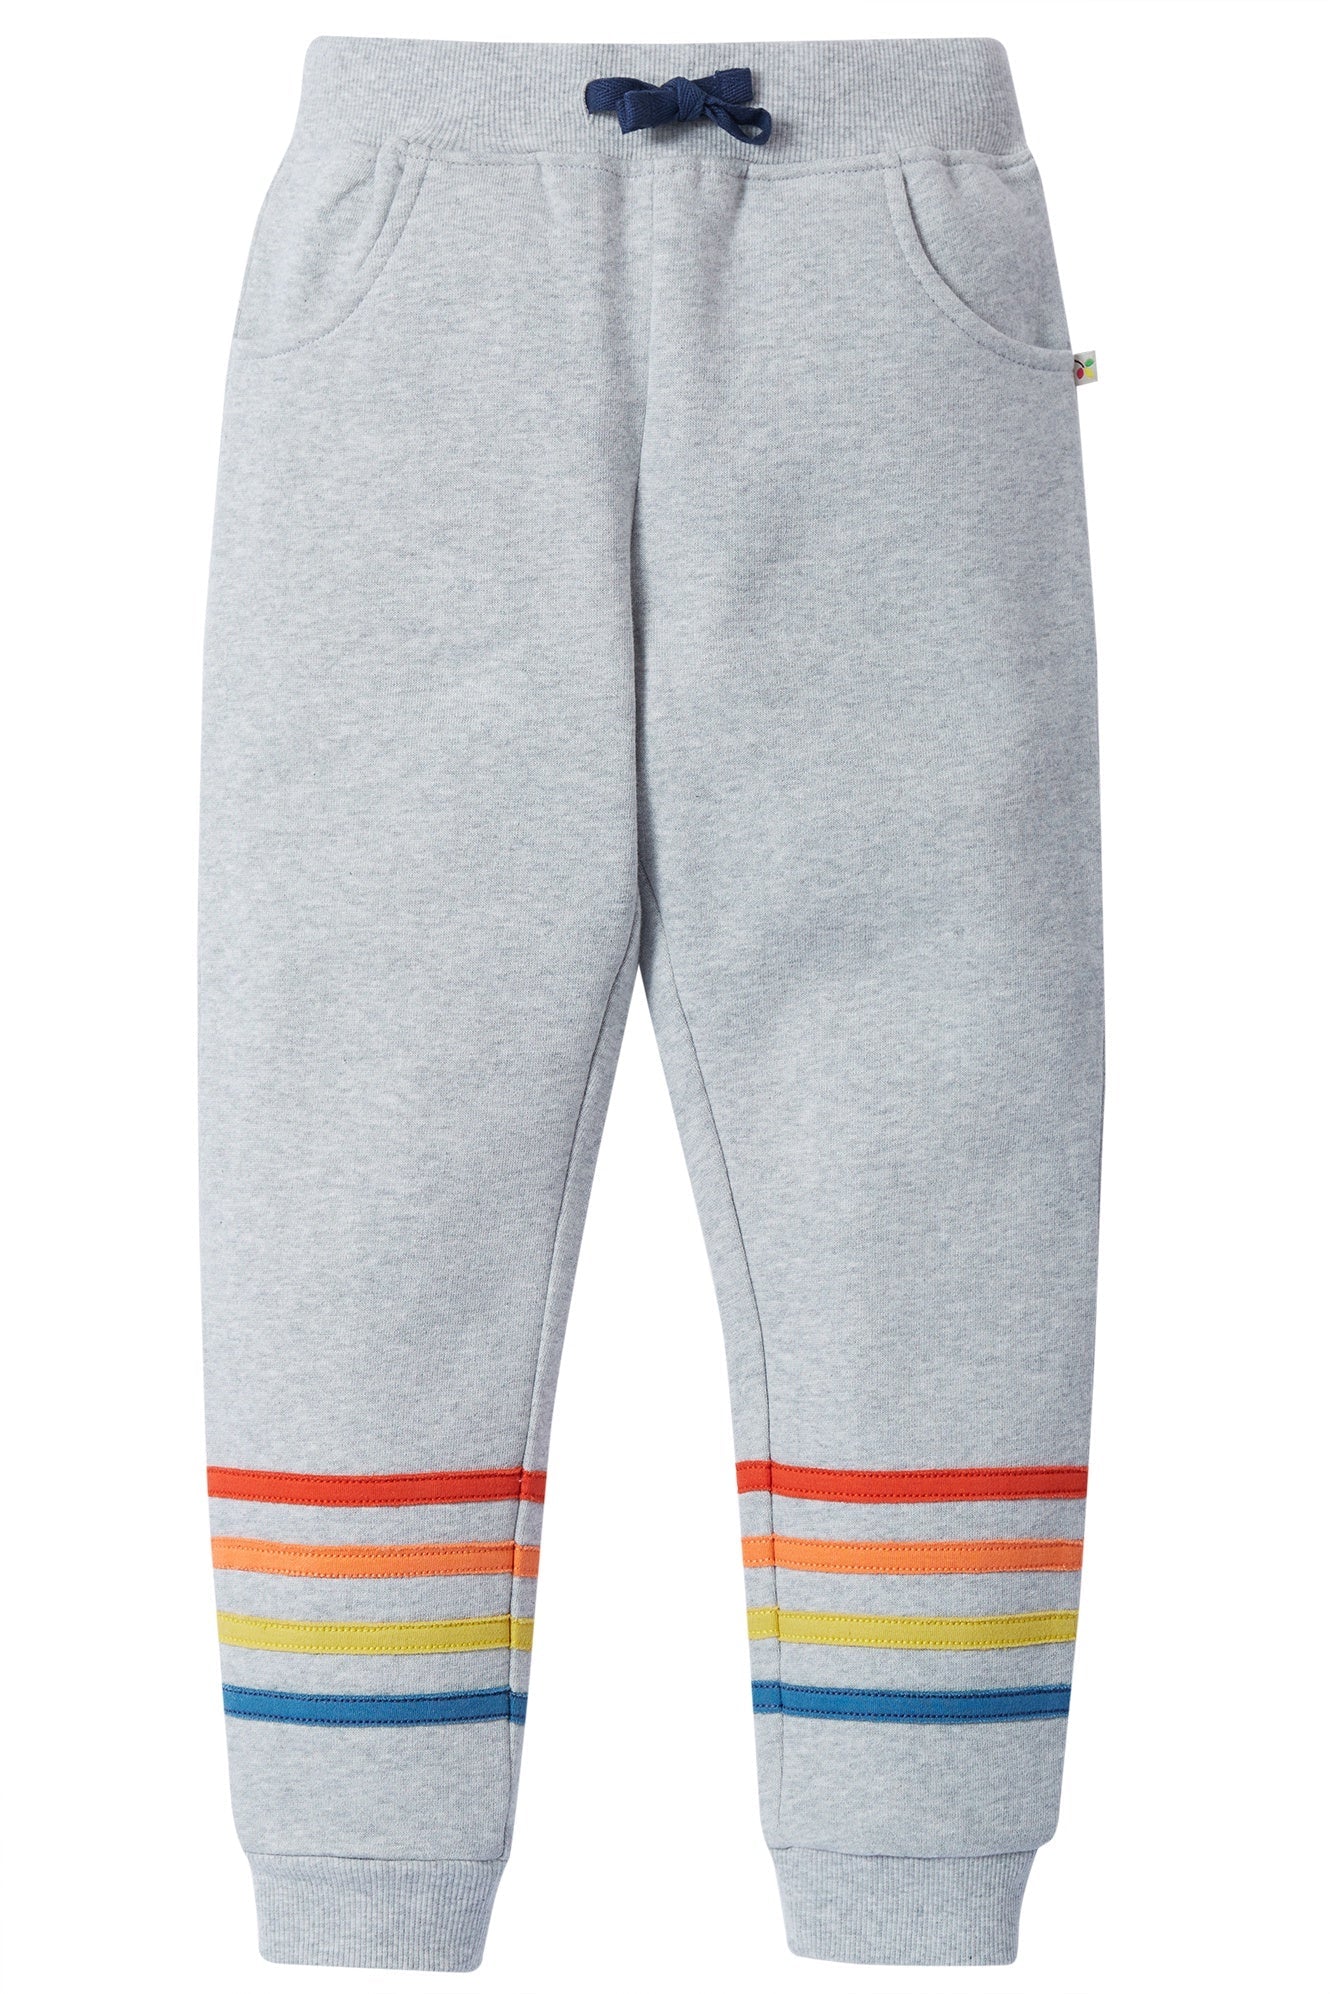 Frugi Switch Jago Joggers in Grey Marl/Rainbow-Kids-Ohh! By Gum - Shop Sustainable